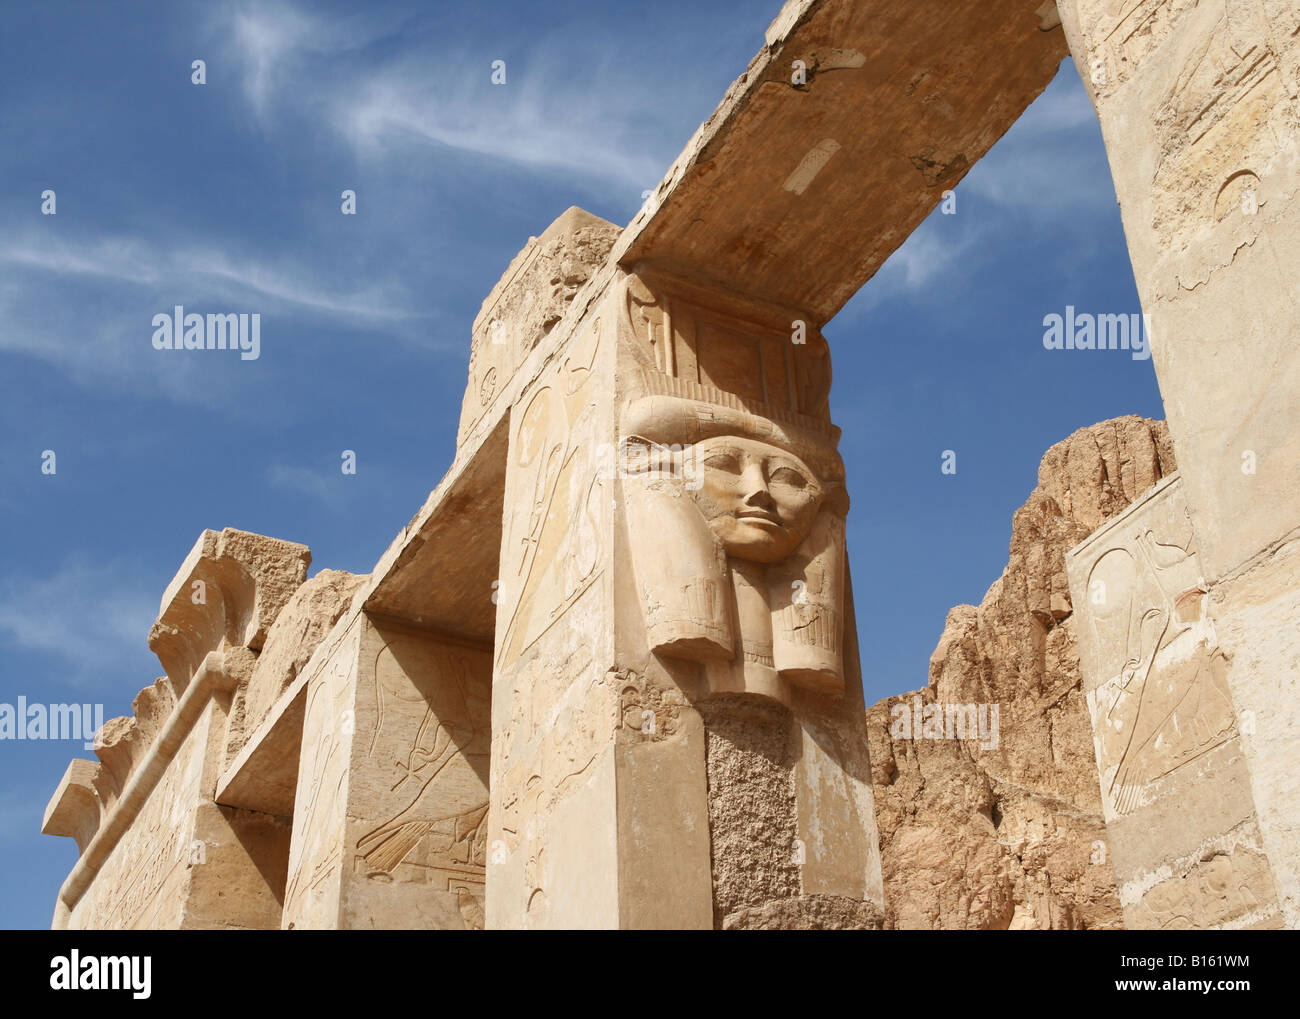 Carving Of A Face Temple Of Hatshepsut Egypt Stock Photo